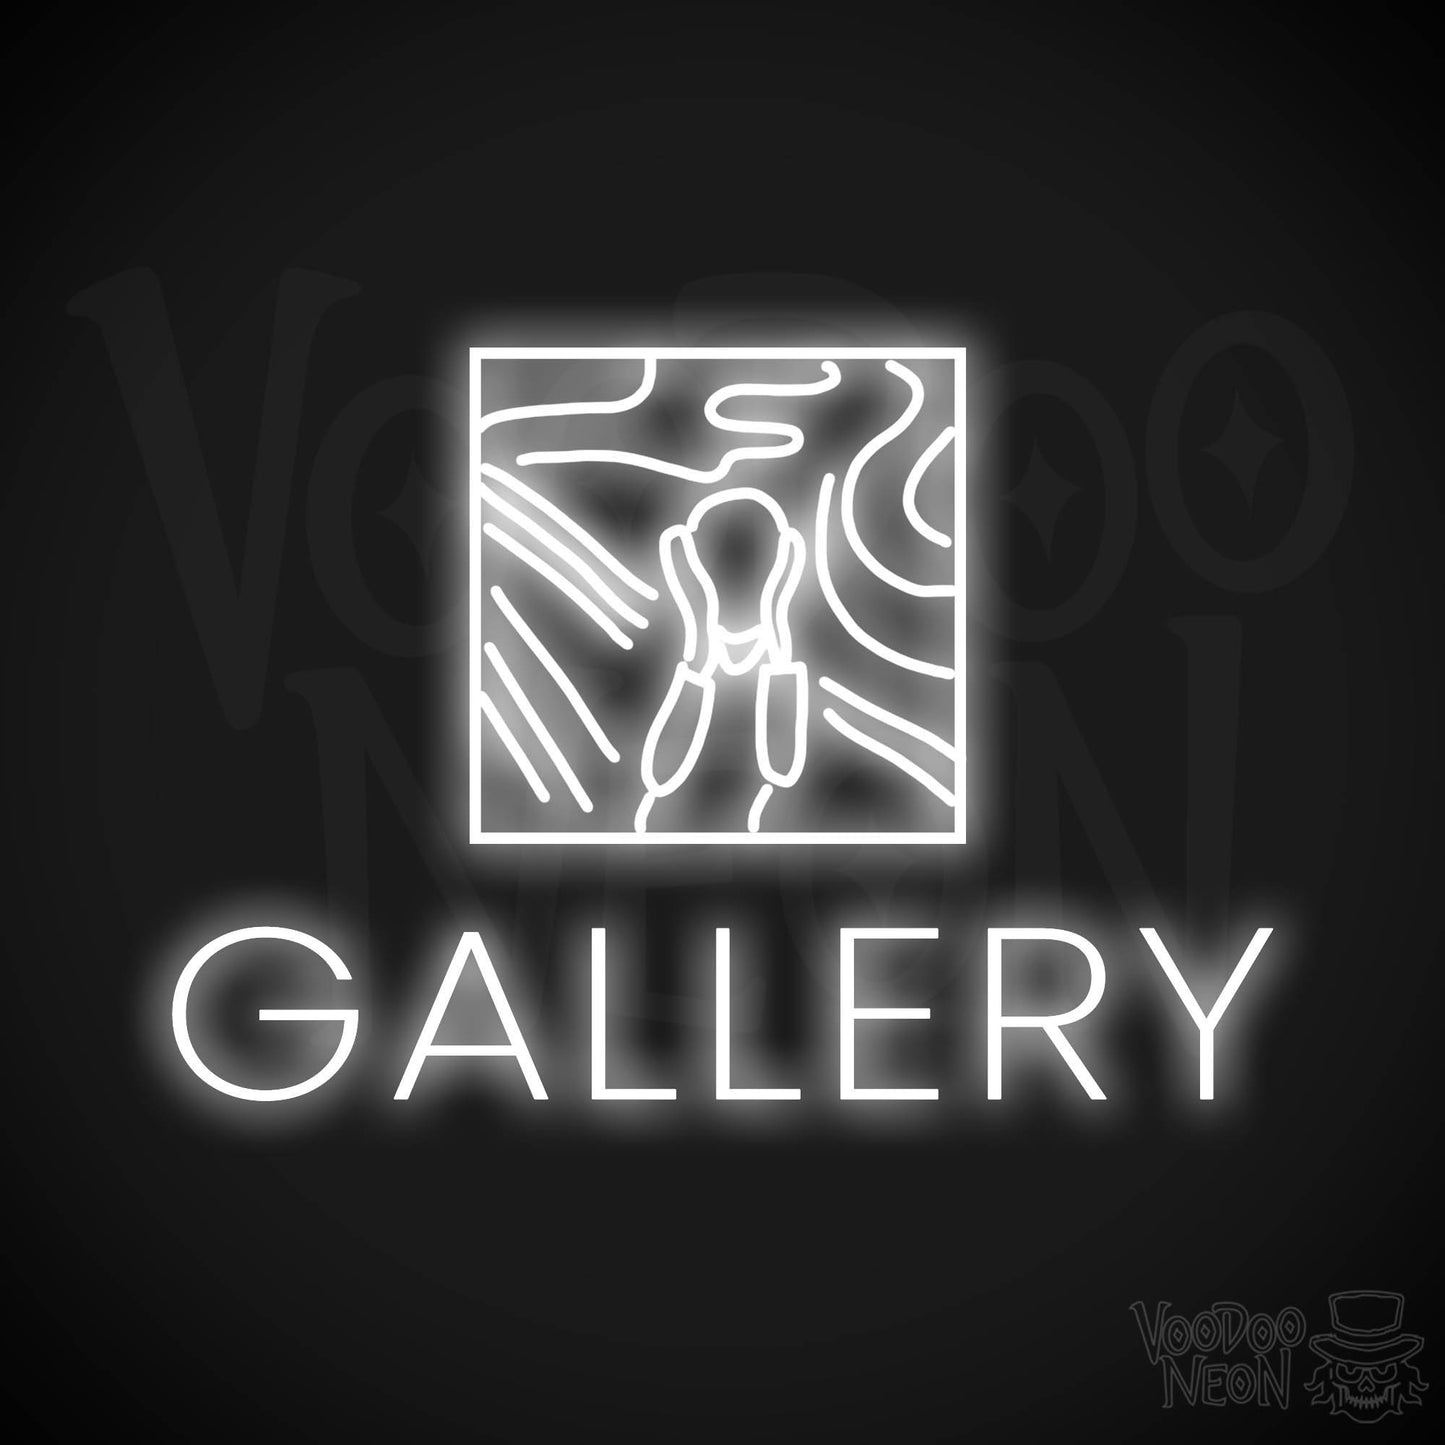 Gallery LED Neon - White